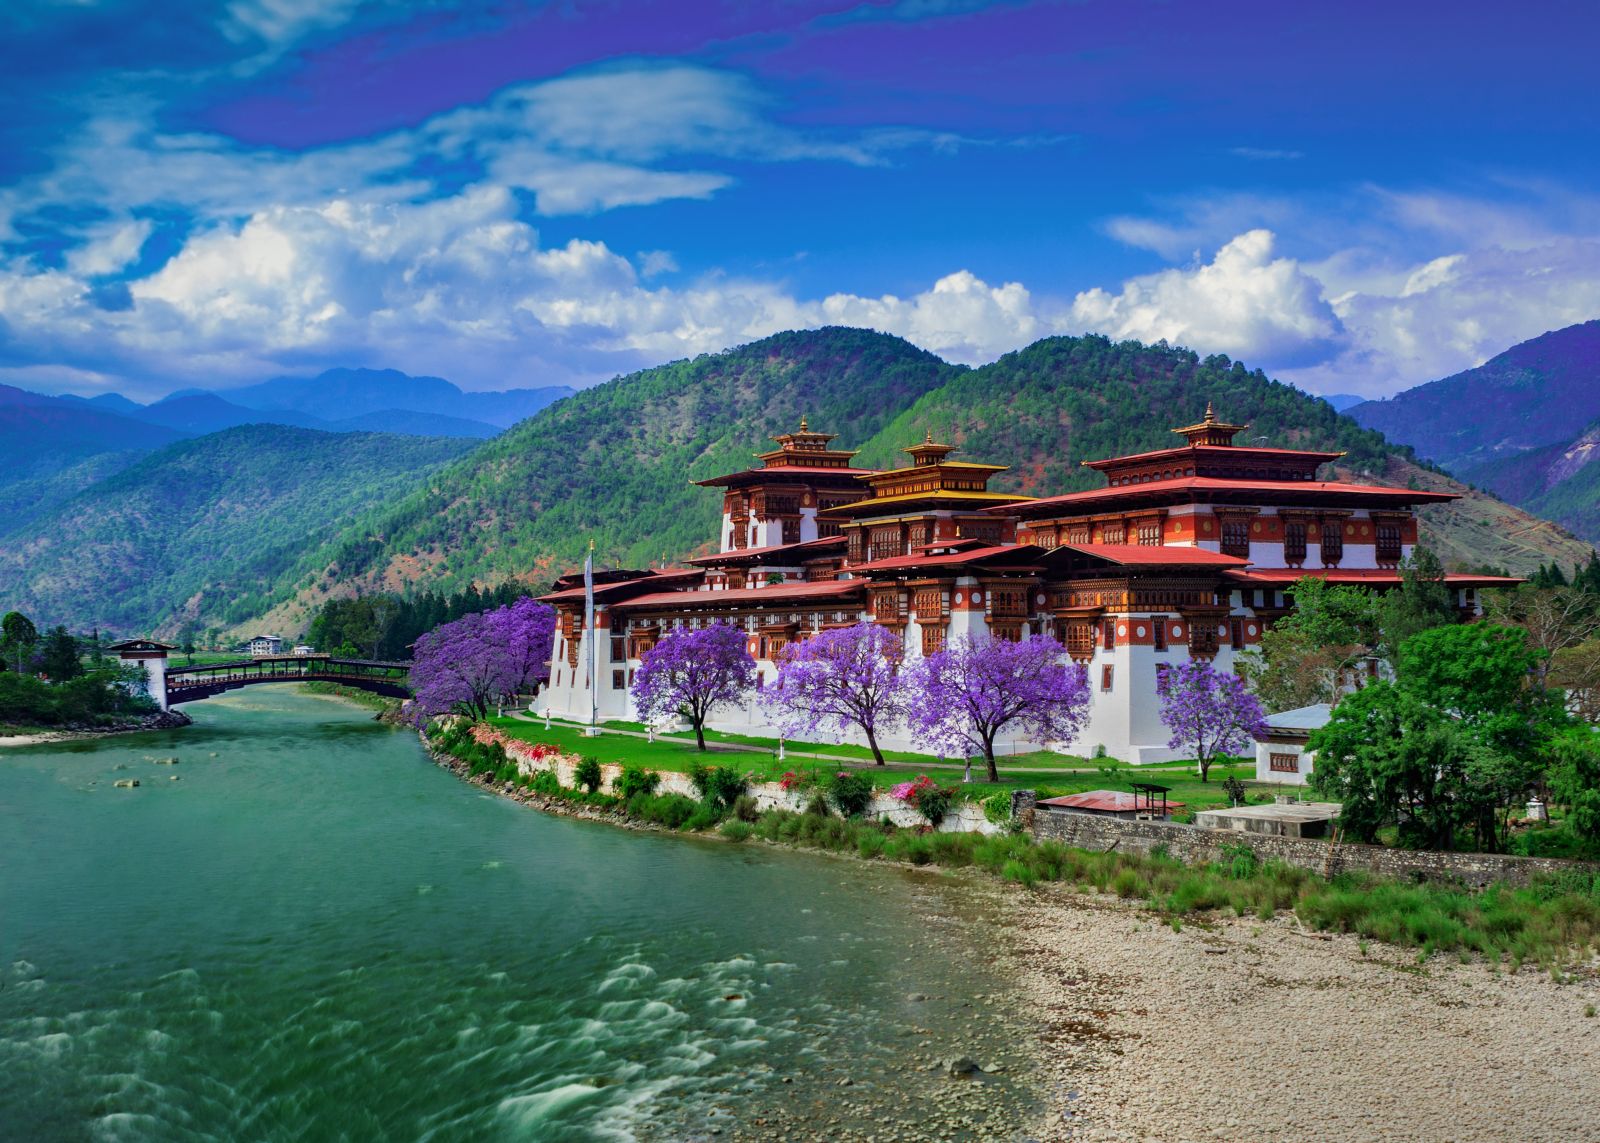 Wonders Of Bhutan Group Tour On The Go Tours, 48% OFF